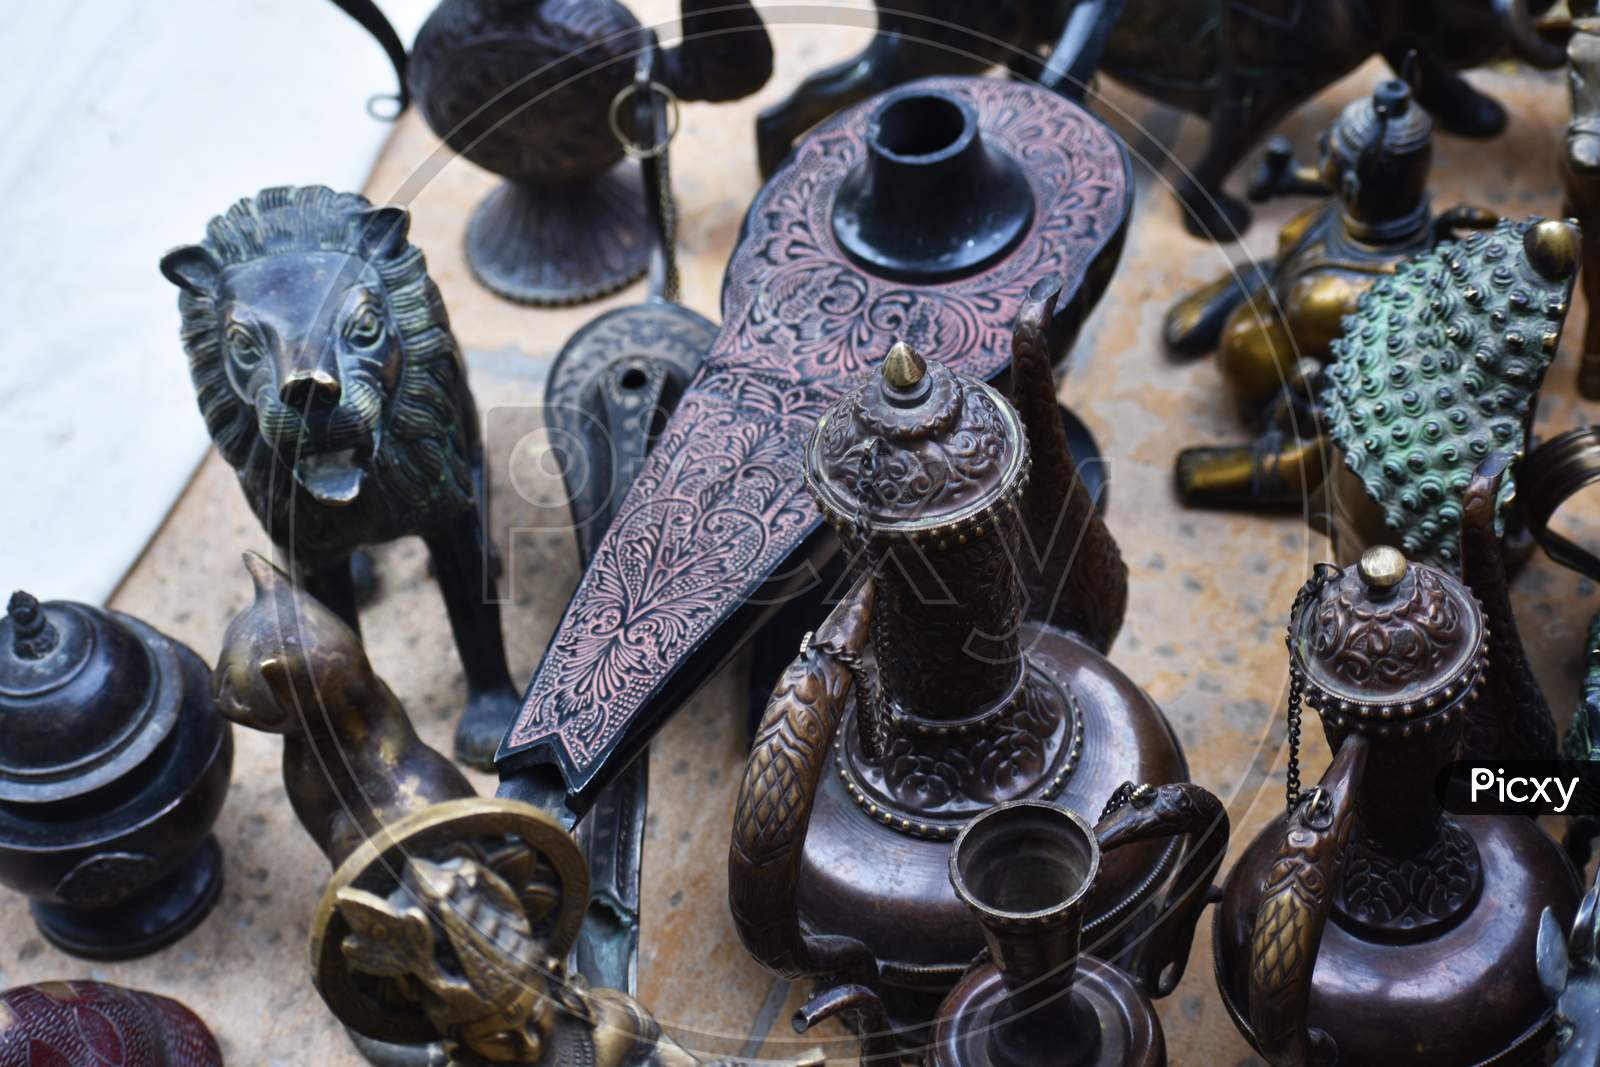 Antique Goods Made Of Metal,Stone And Glass Selling On Roadside Of Jaisalmer